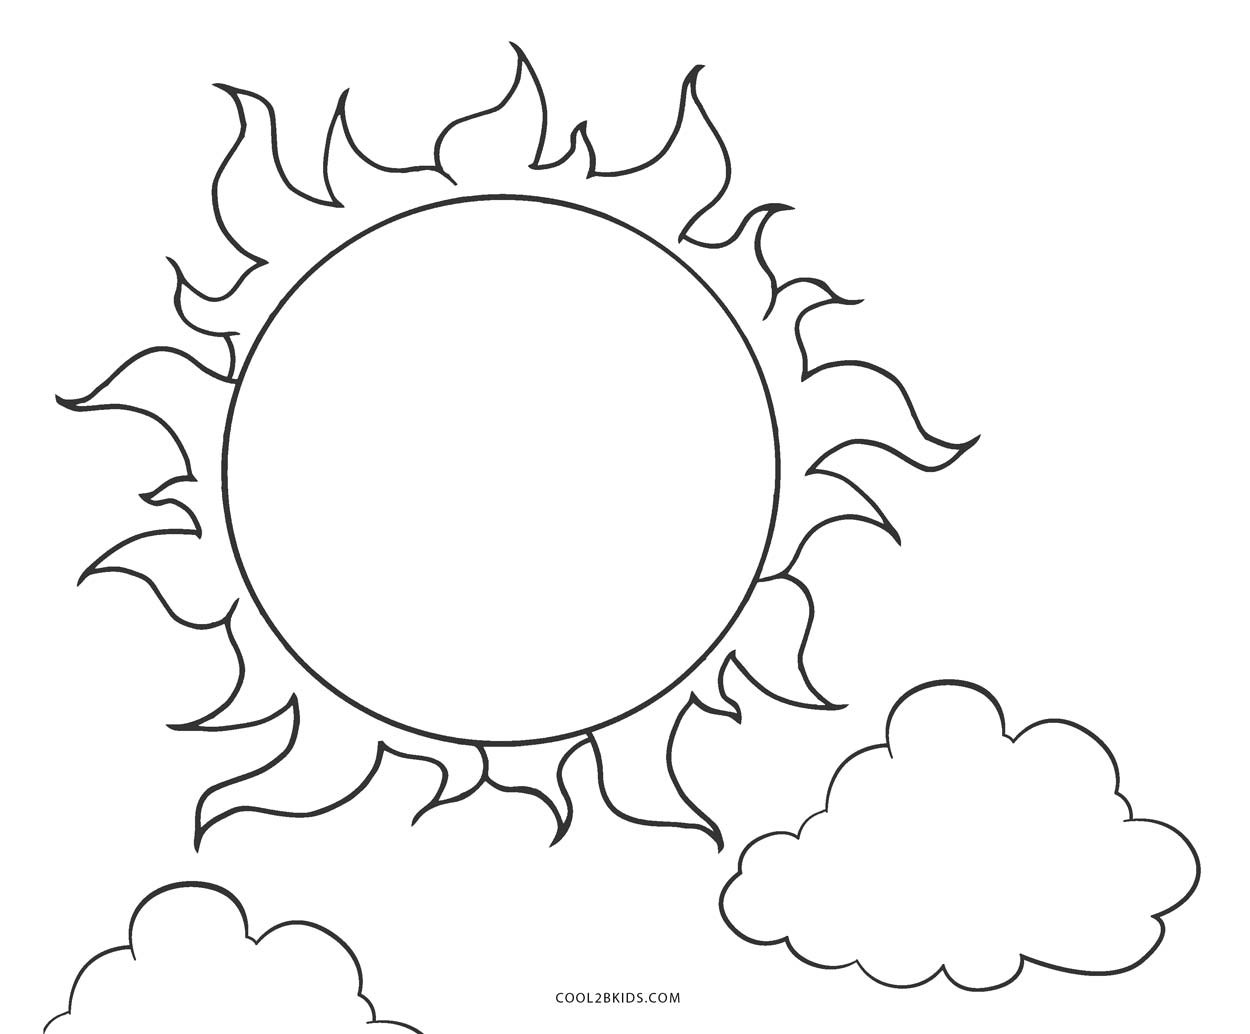 Sun Coloring Pages For Kids
 Free Printable Sun Coloring Pages For Kids